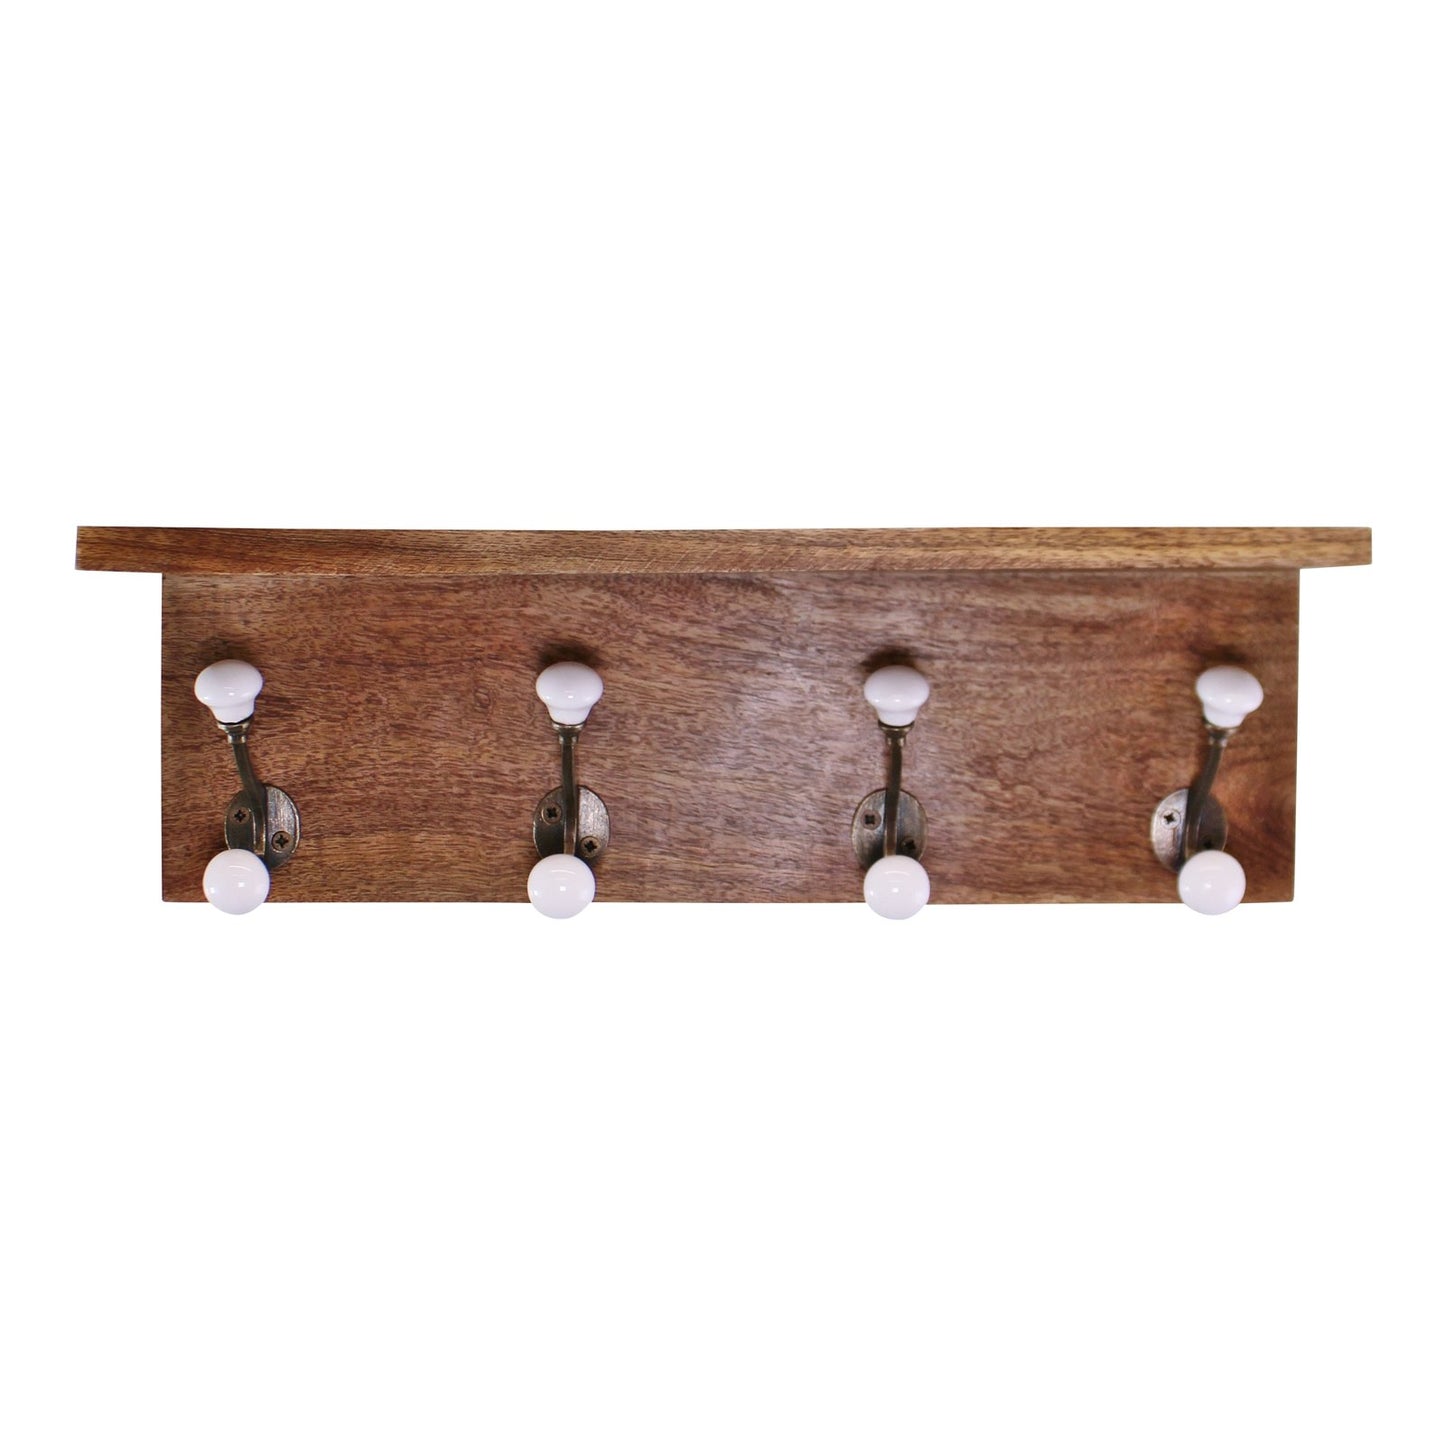 Set of 4 White Ceramic Double Coat Hooks On Wooden Base With Shelf Willow and Wine